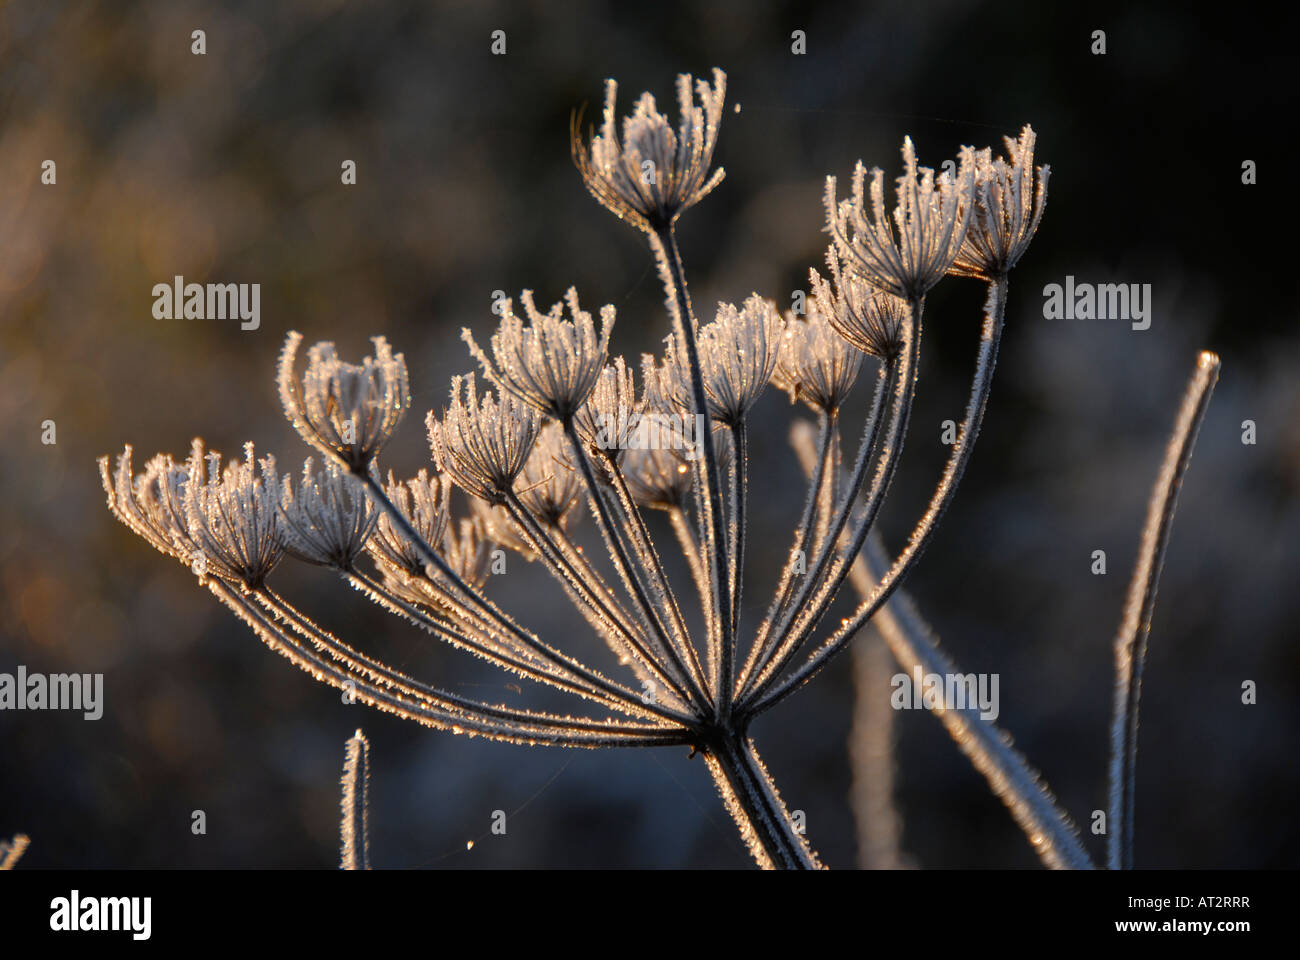 Wild flower seed heads in frost Graphic image Stock Photo